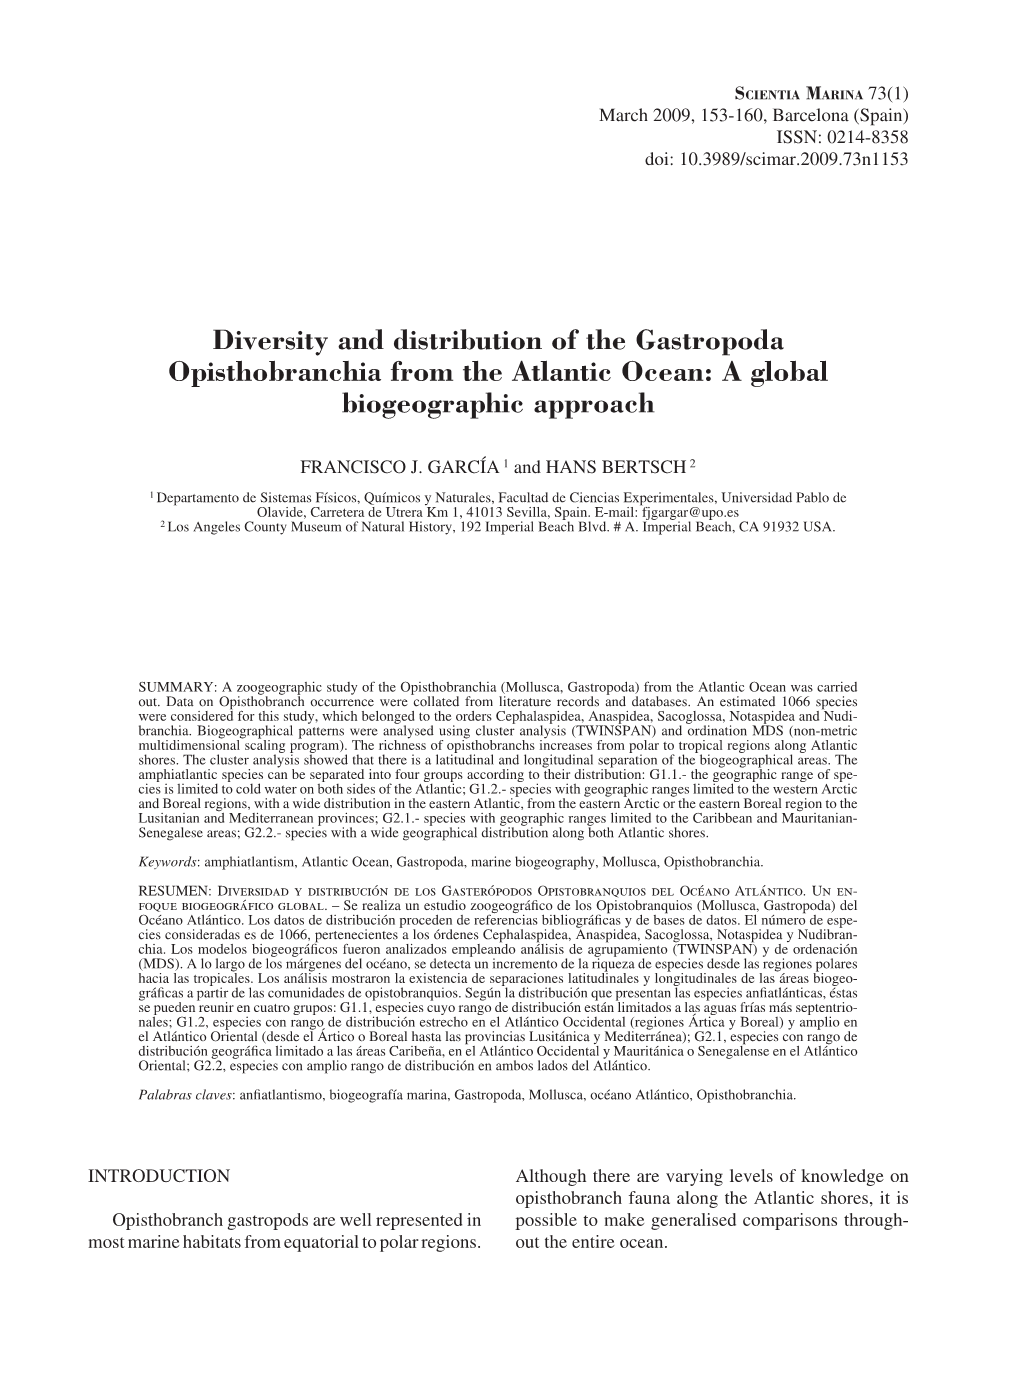 Diversity and Distribution of the Gastropoda Opisthobranchia from the Atlantic Ocean: a Global Biogeographic Approach